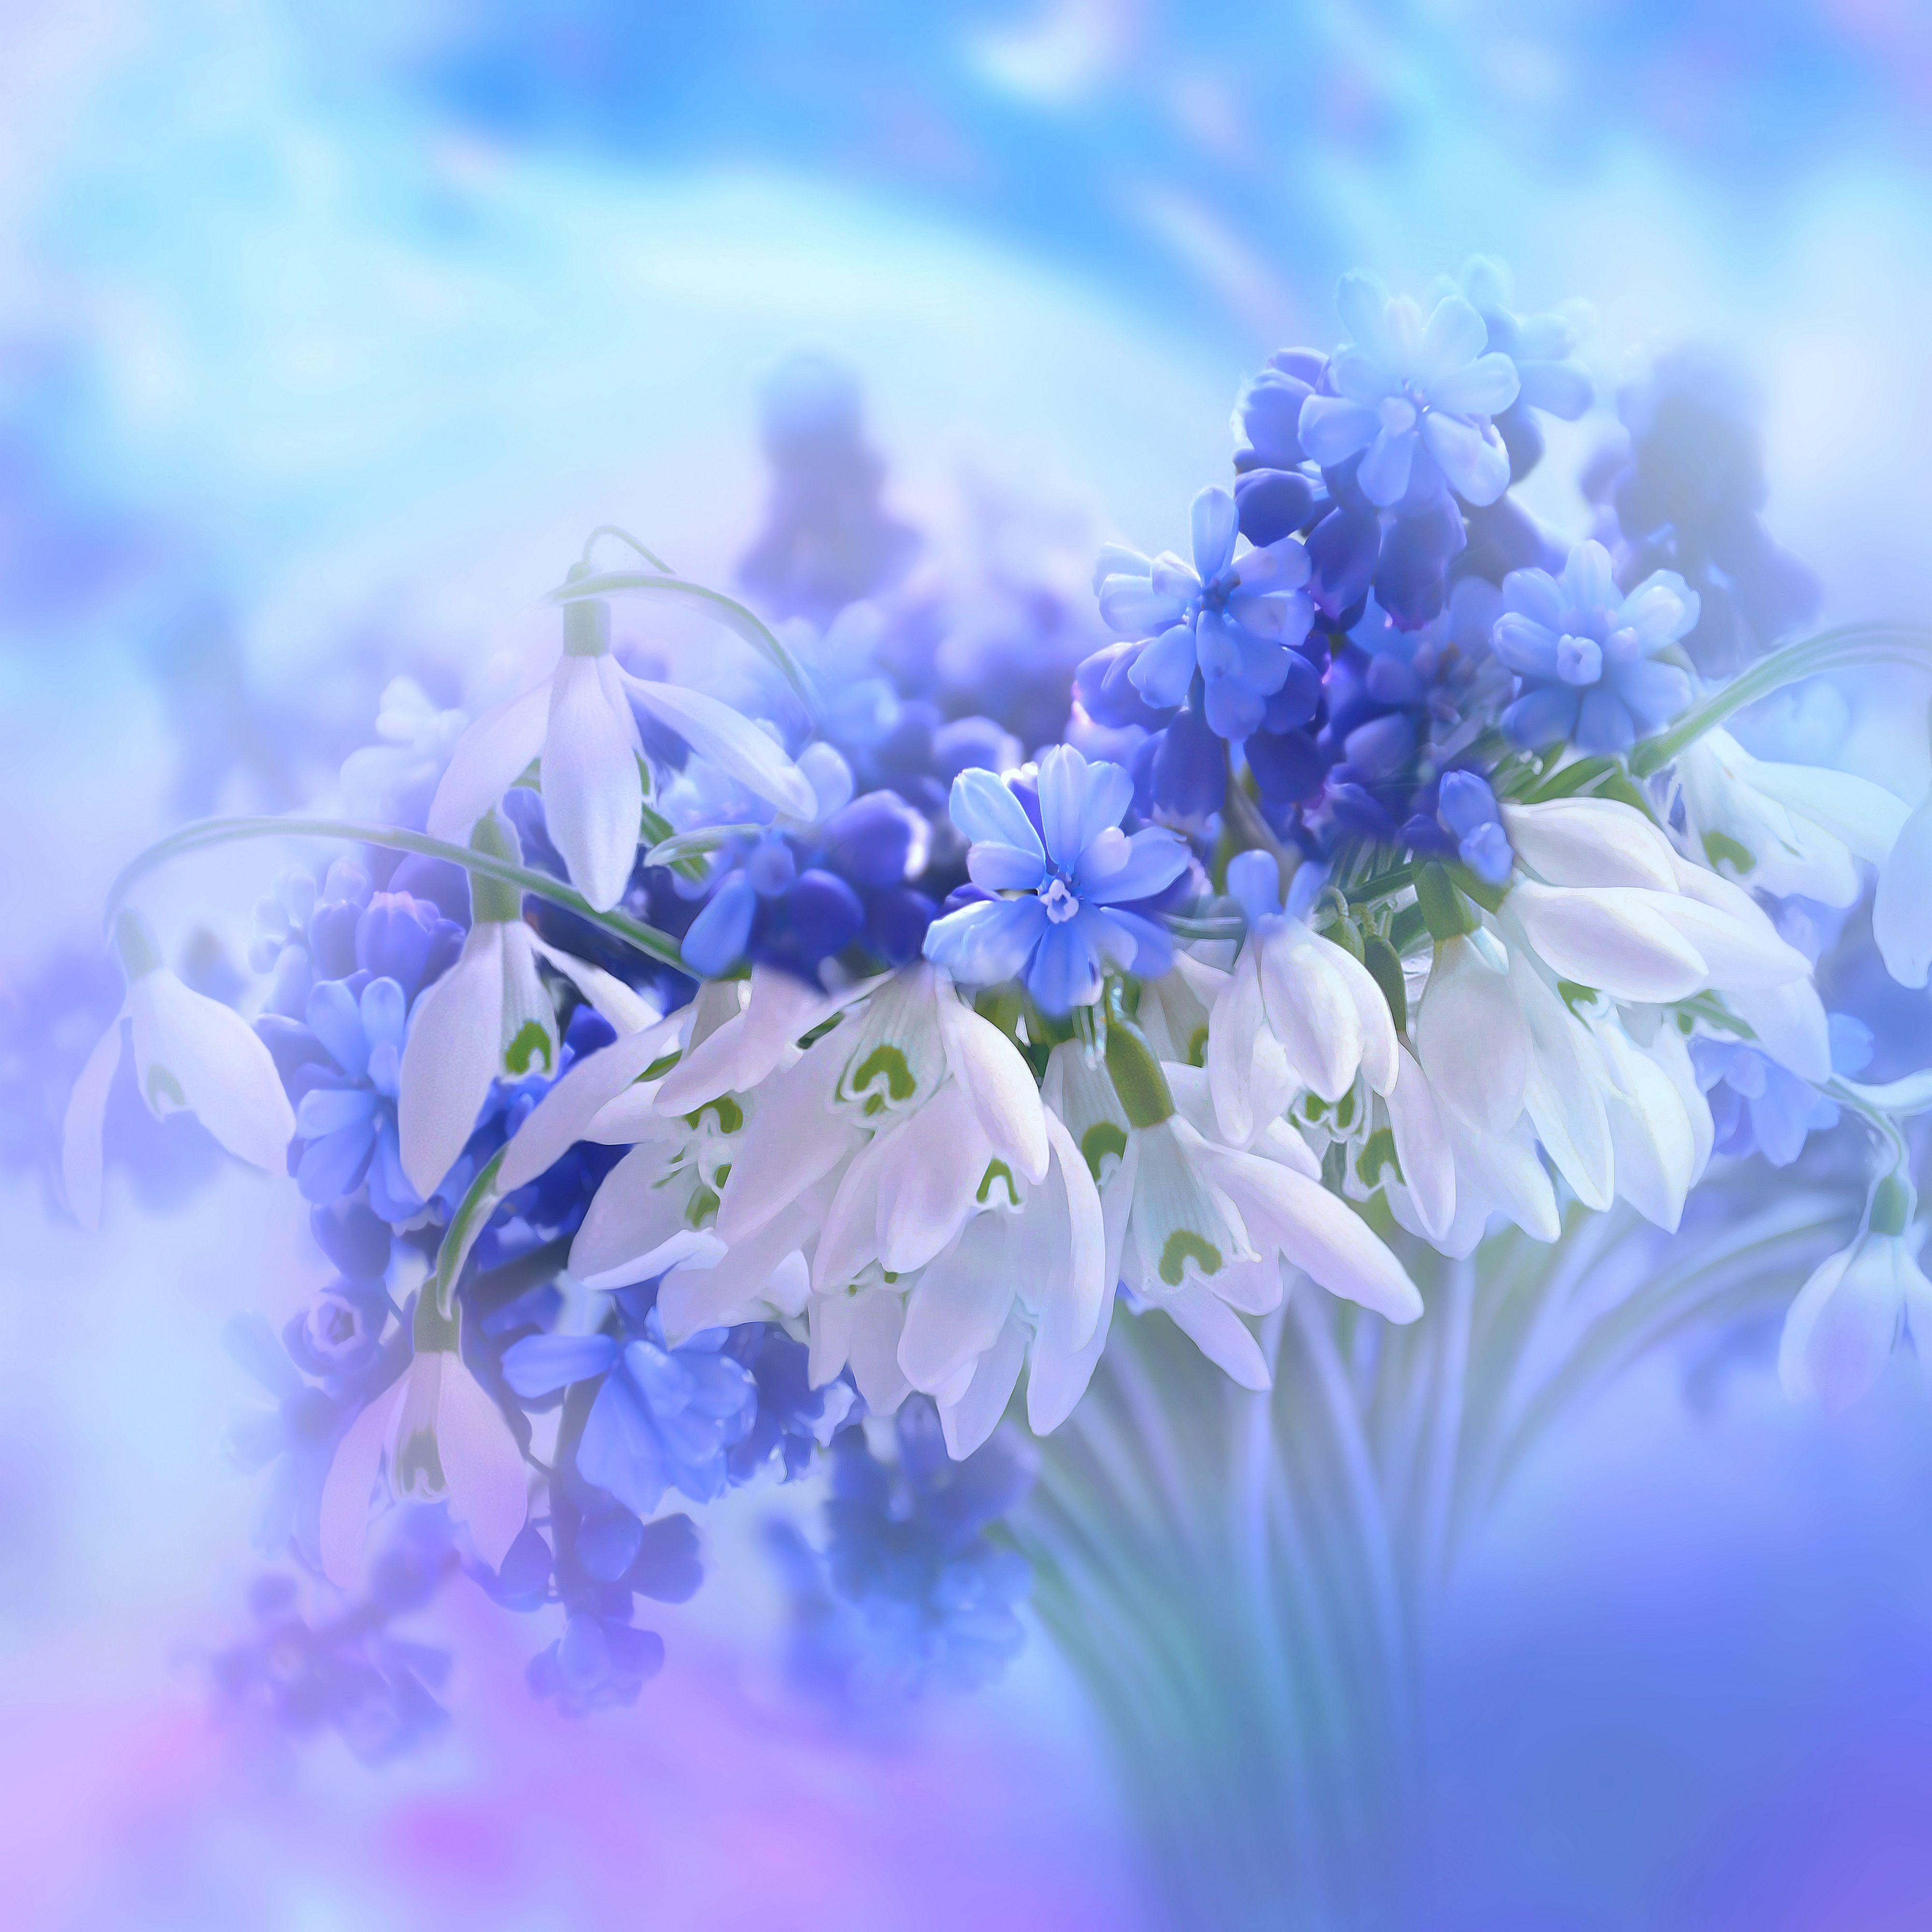 Blue and White Flower Wallpapers - Top Free Blue and White Flower